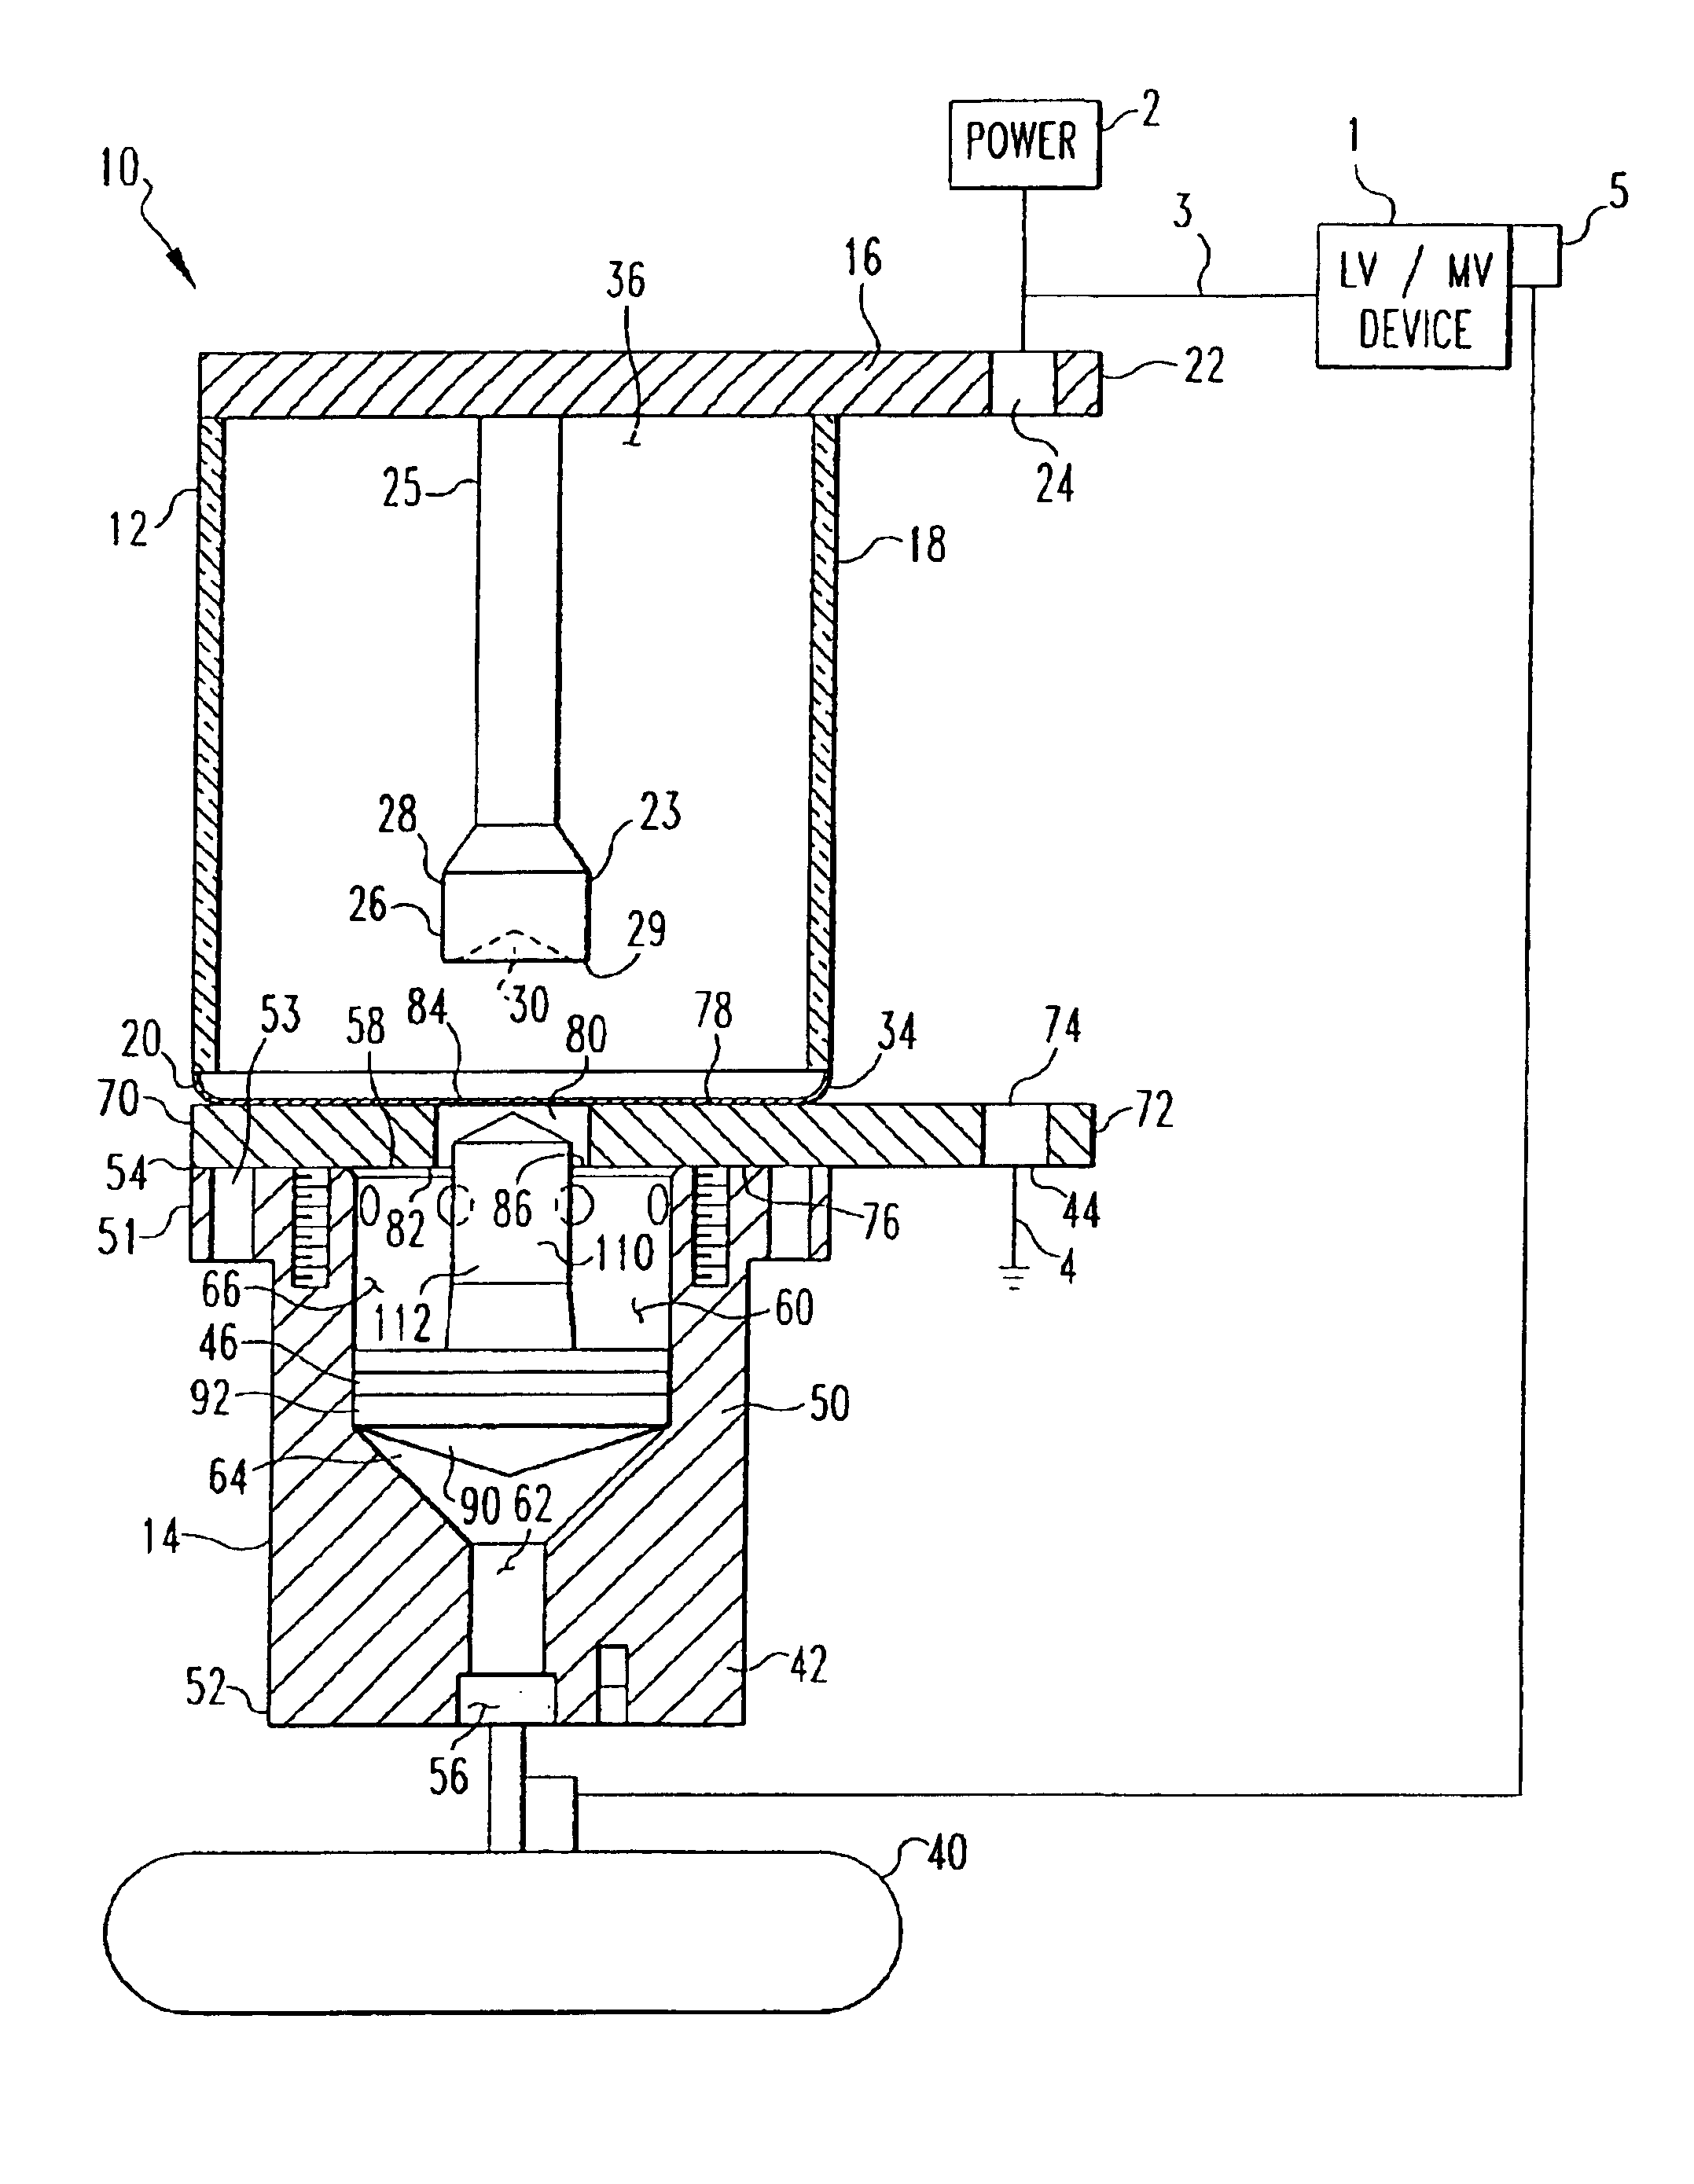 Vacuum arc eliminator having a bullet assembly actuated by a gas generating device